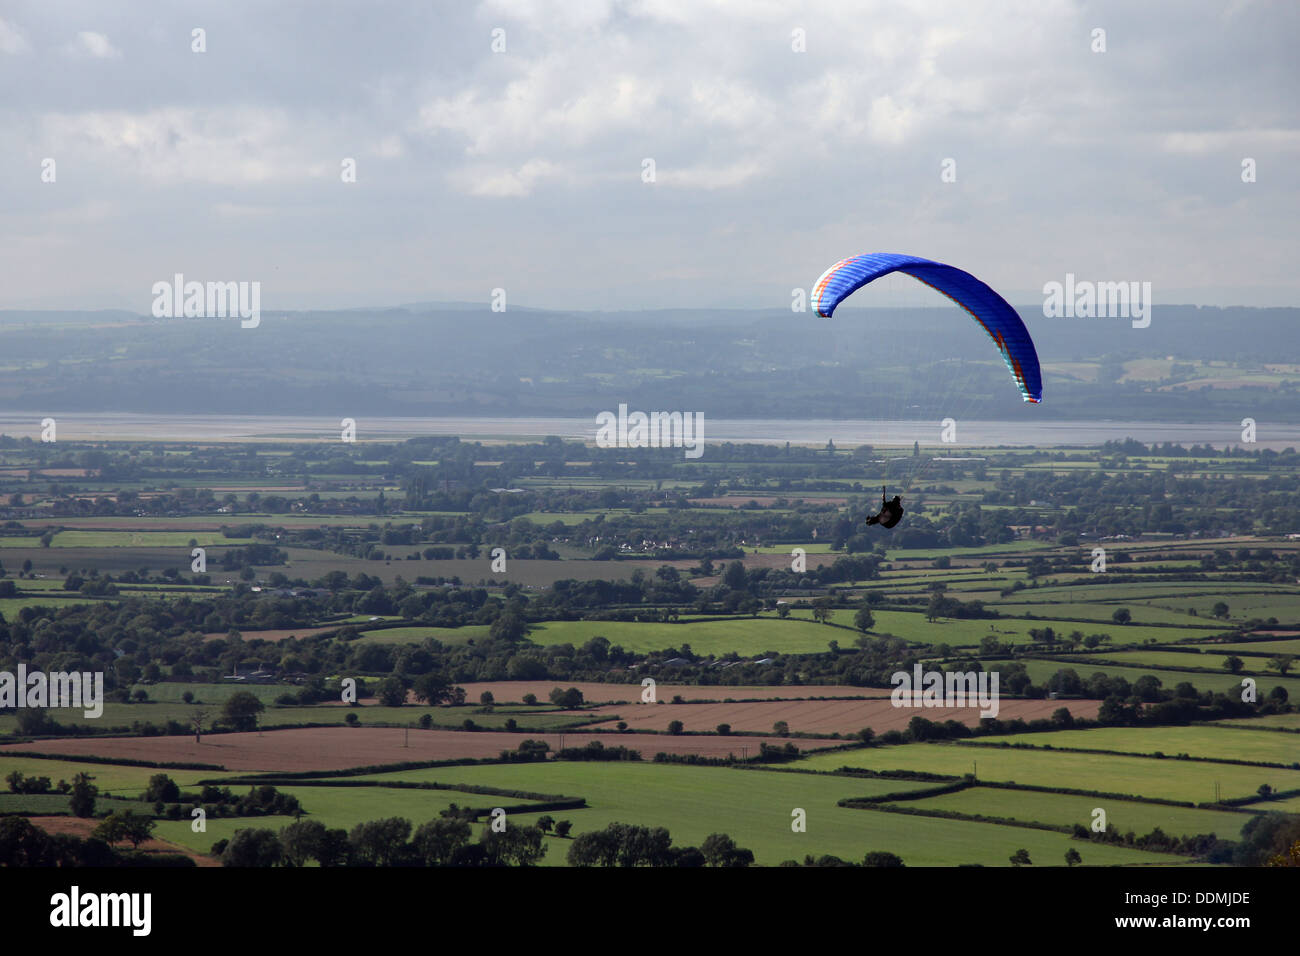 A paraglider rises above the Cotswold escarpment at Woodchester, Cheltenham, UK. Stock Photo